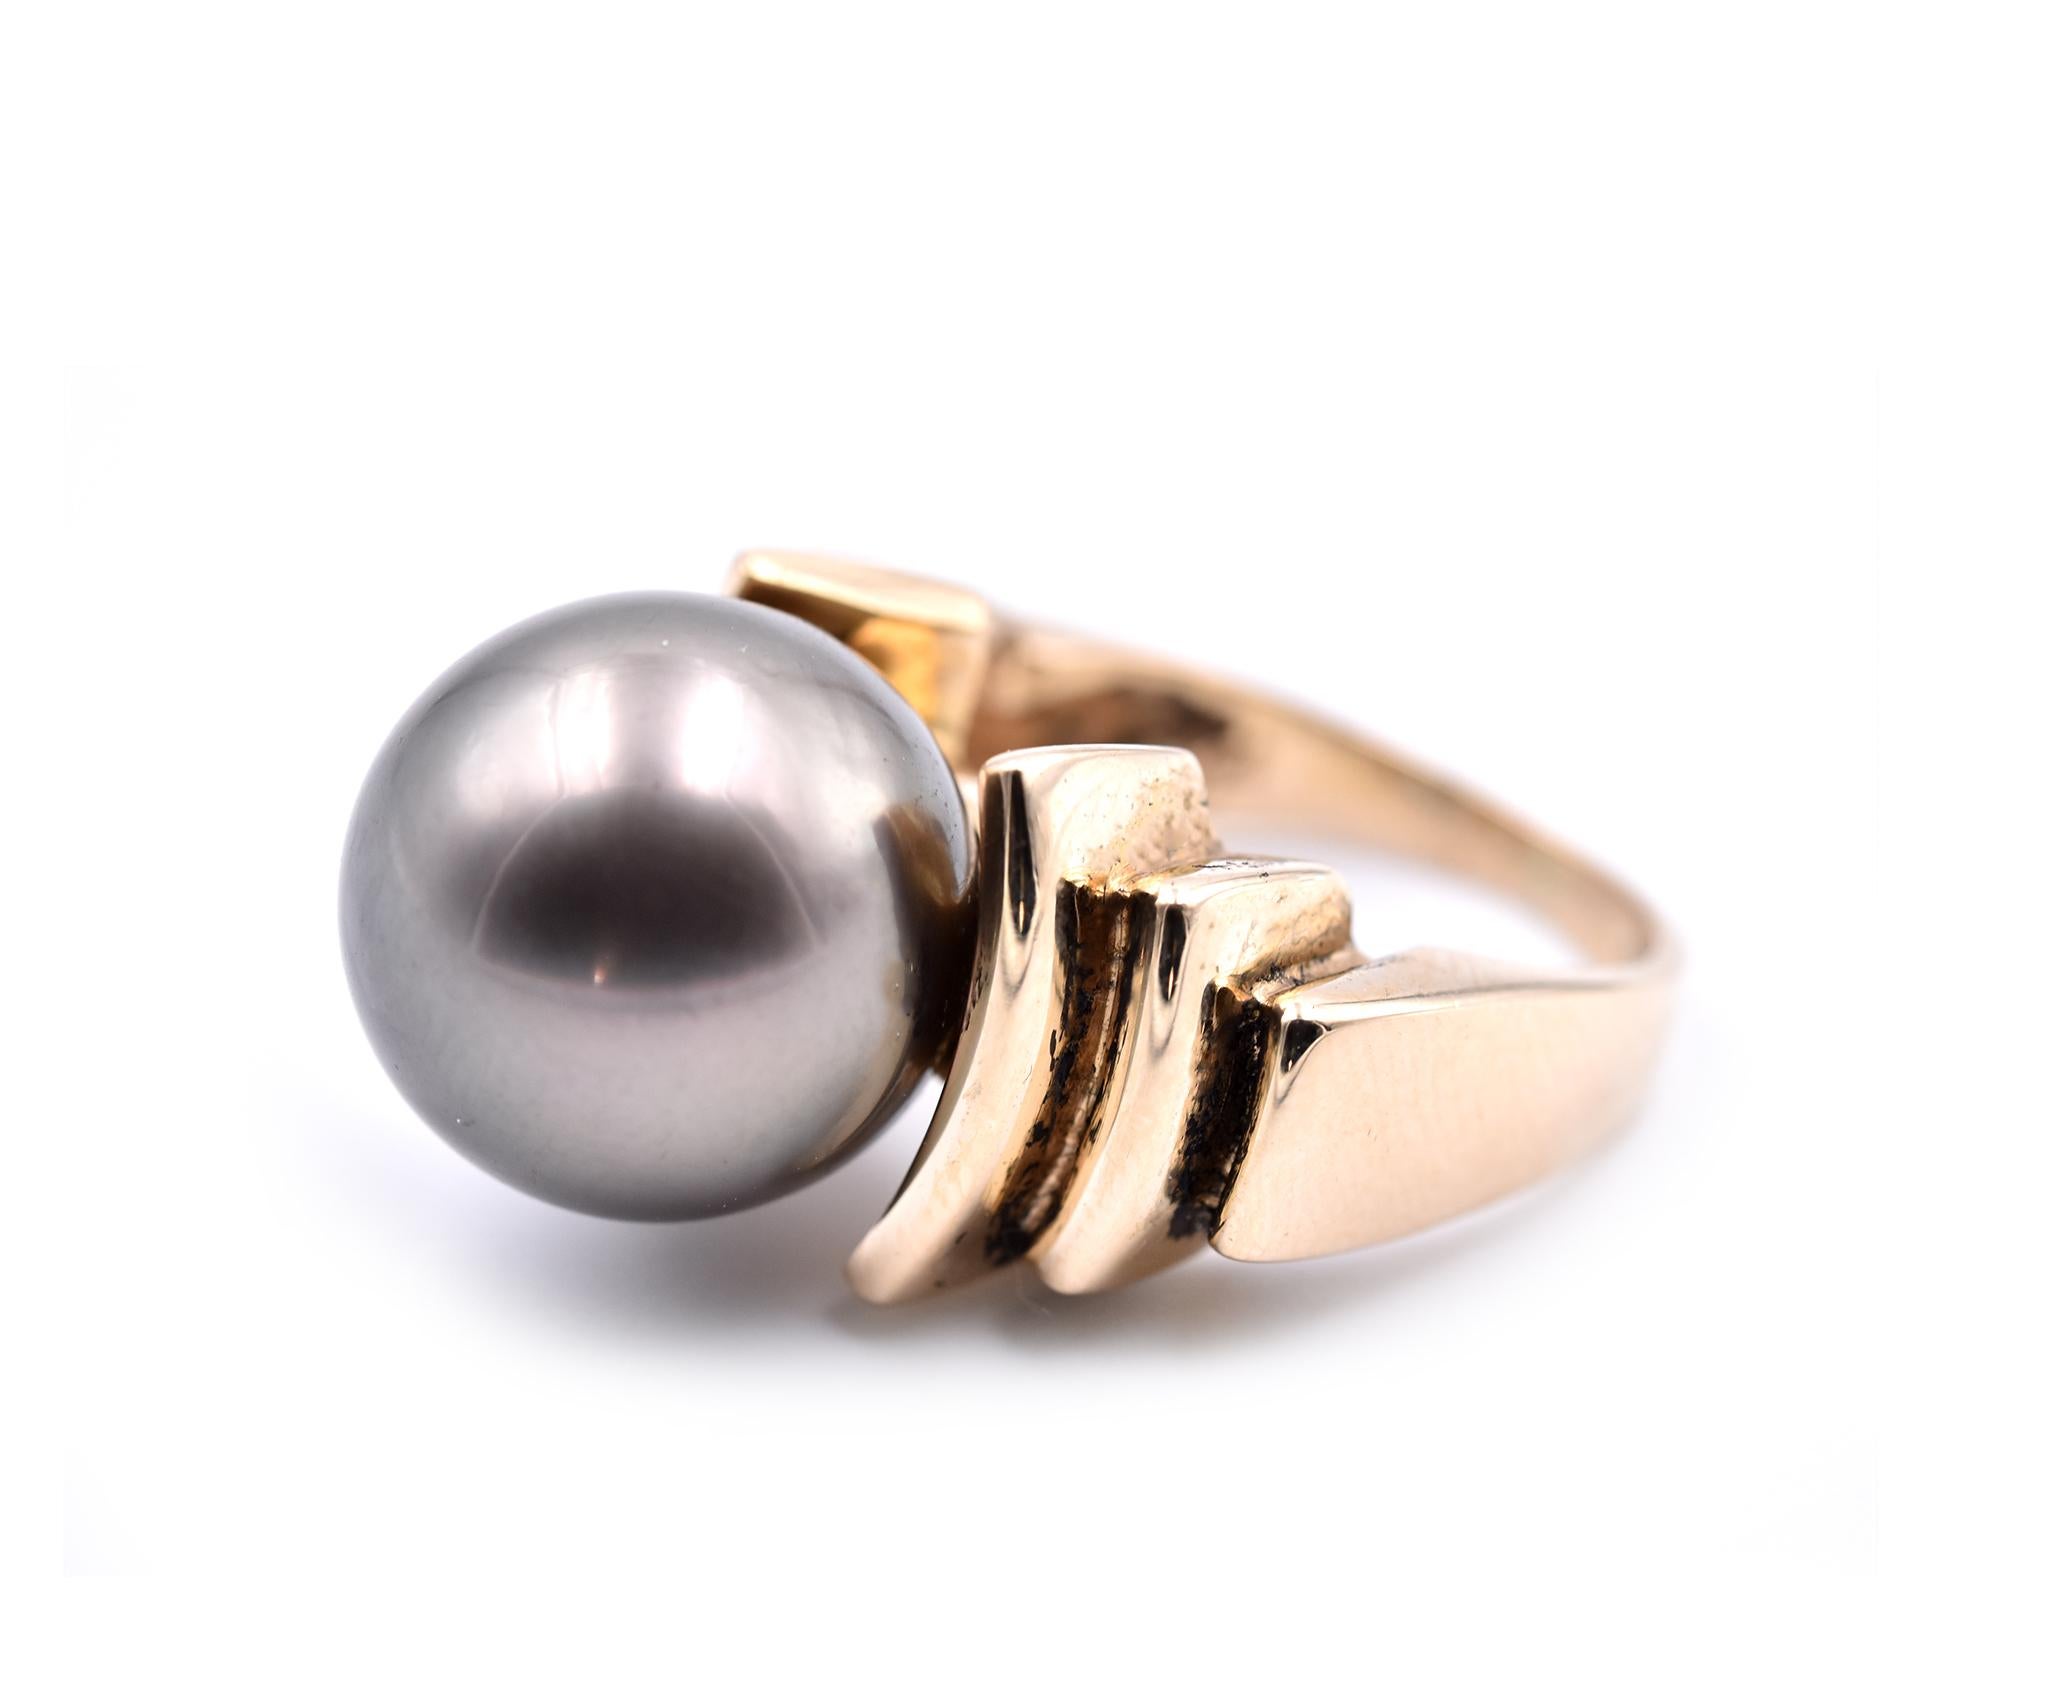 Designer: custom design
Material: 14k Yellow Gold
Pearl: Tahitian pearl
Ring Size: 5 1/2 (please allow two additional shipping days for sizing requests)
Dimensions: ring measures 33.22mm in height and 23.02mm in width
Weight: 12.23 grams
